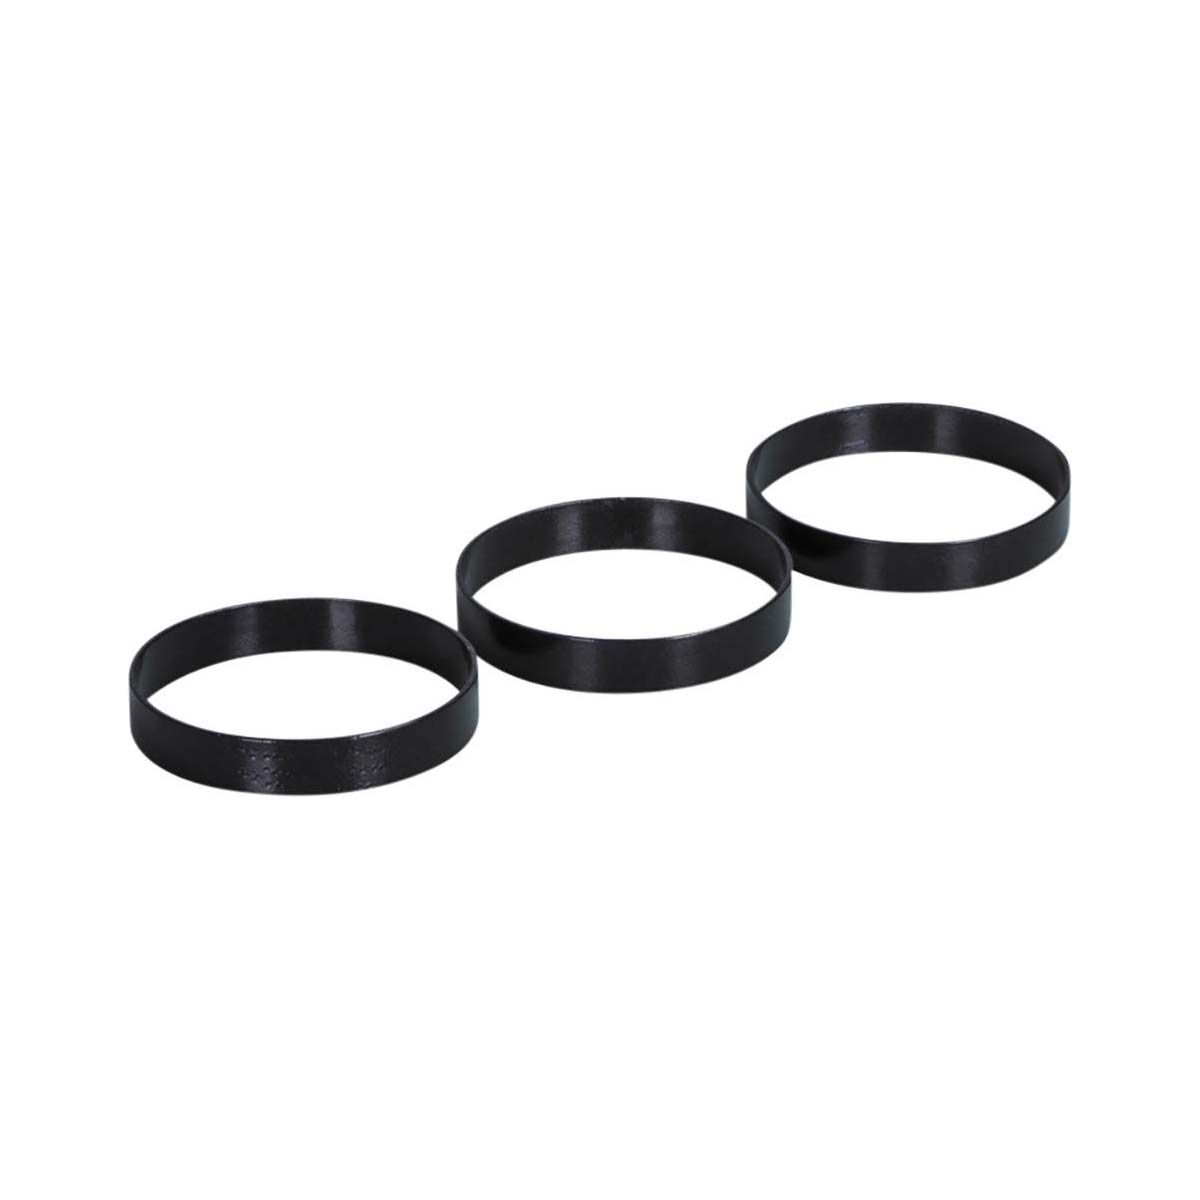 3 Black Non-Stick Egg Ring with Handle - 2/Pair